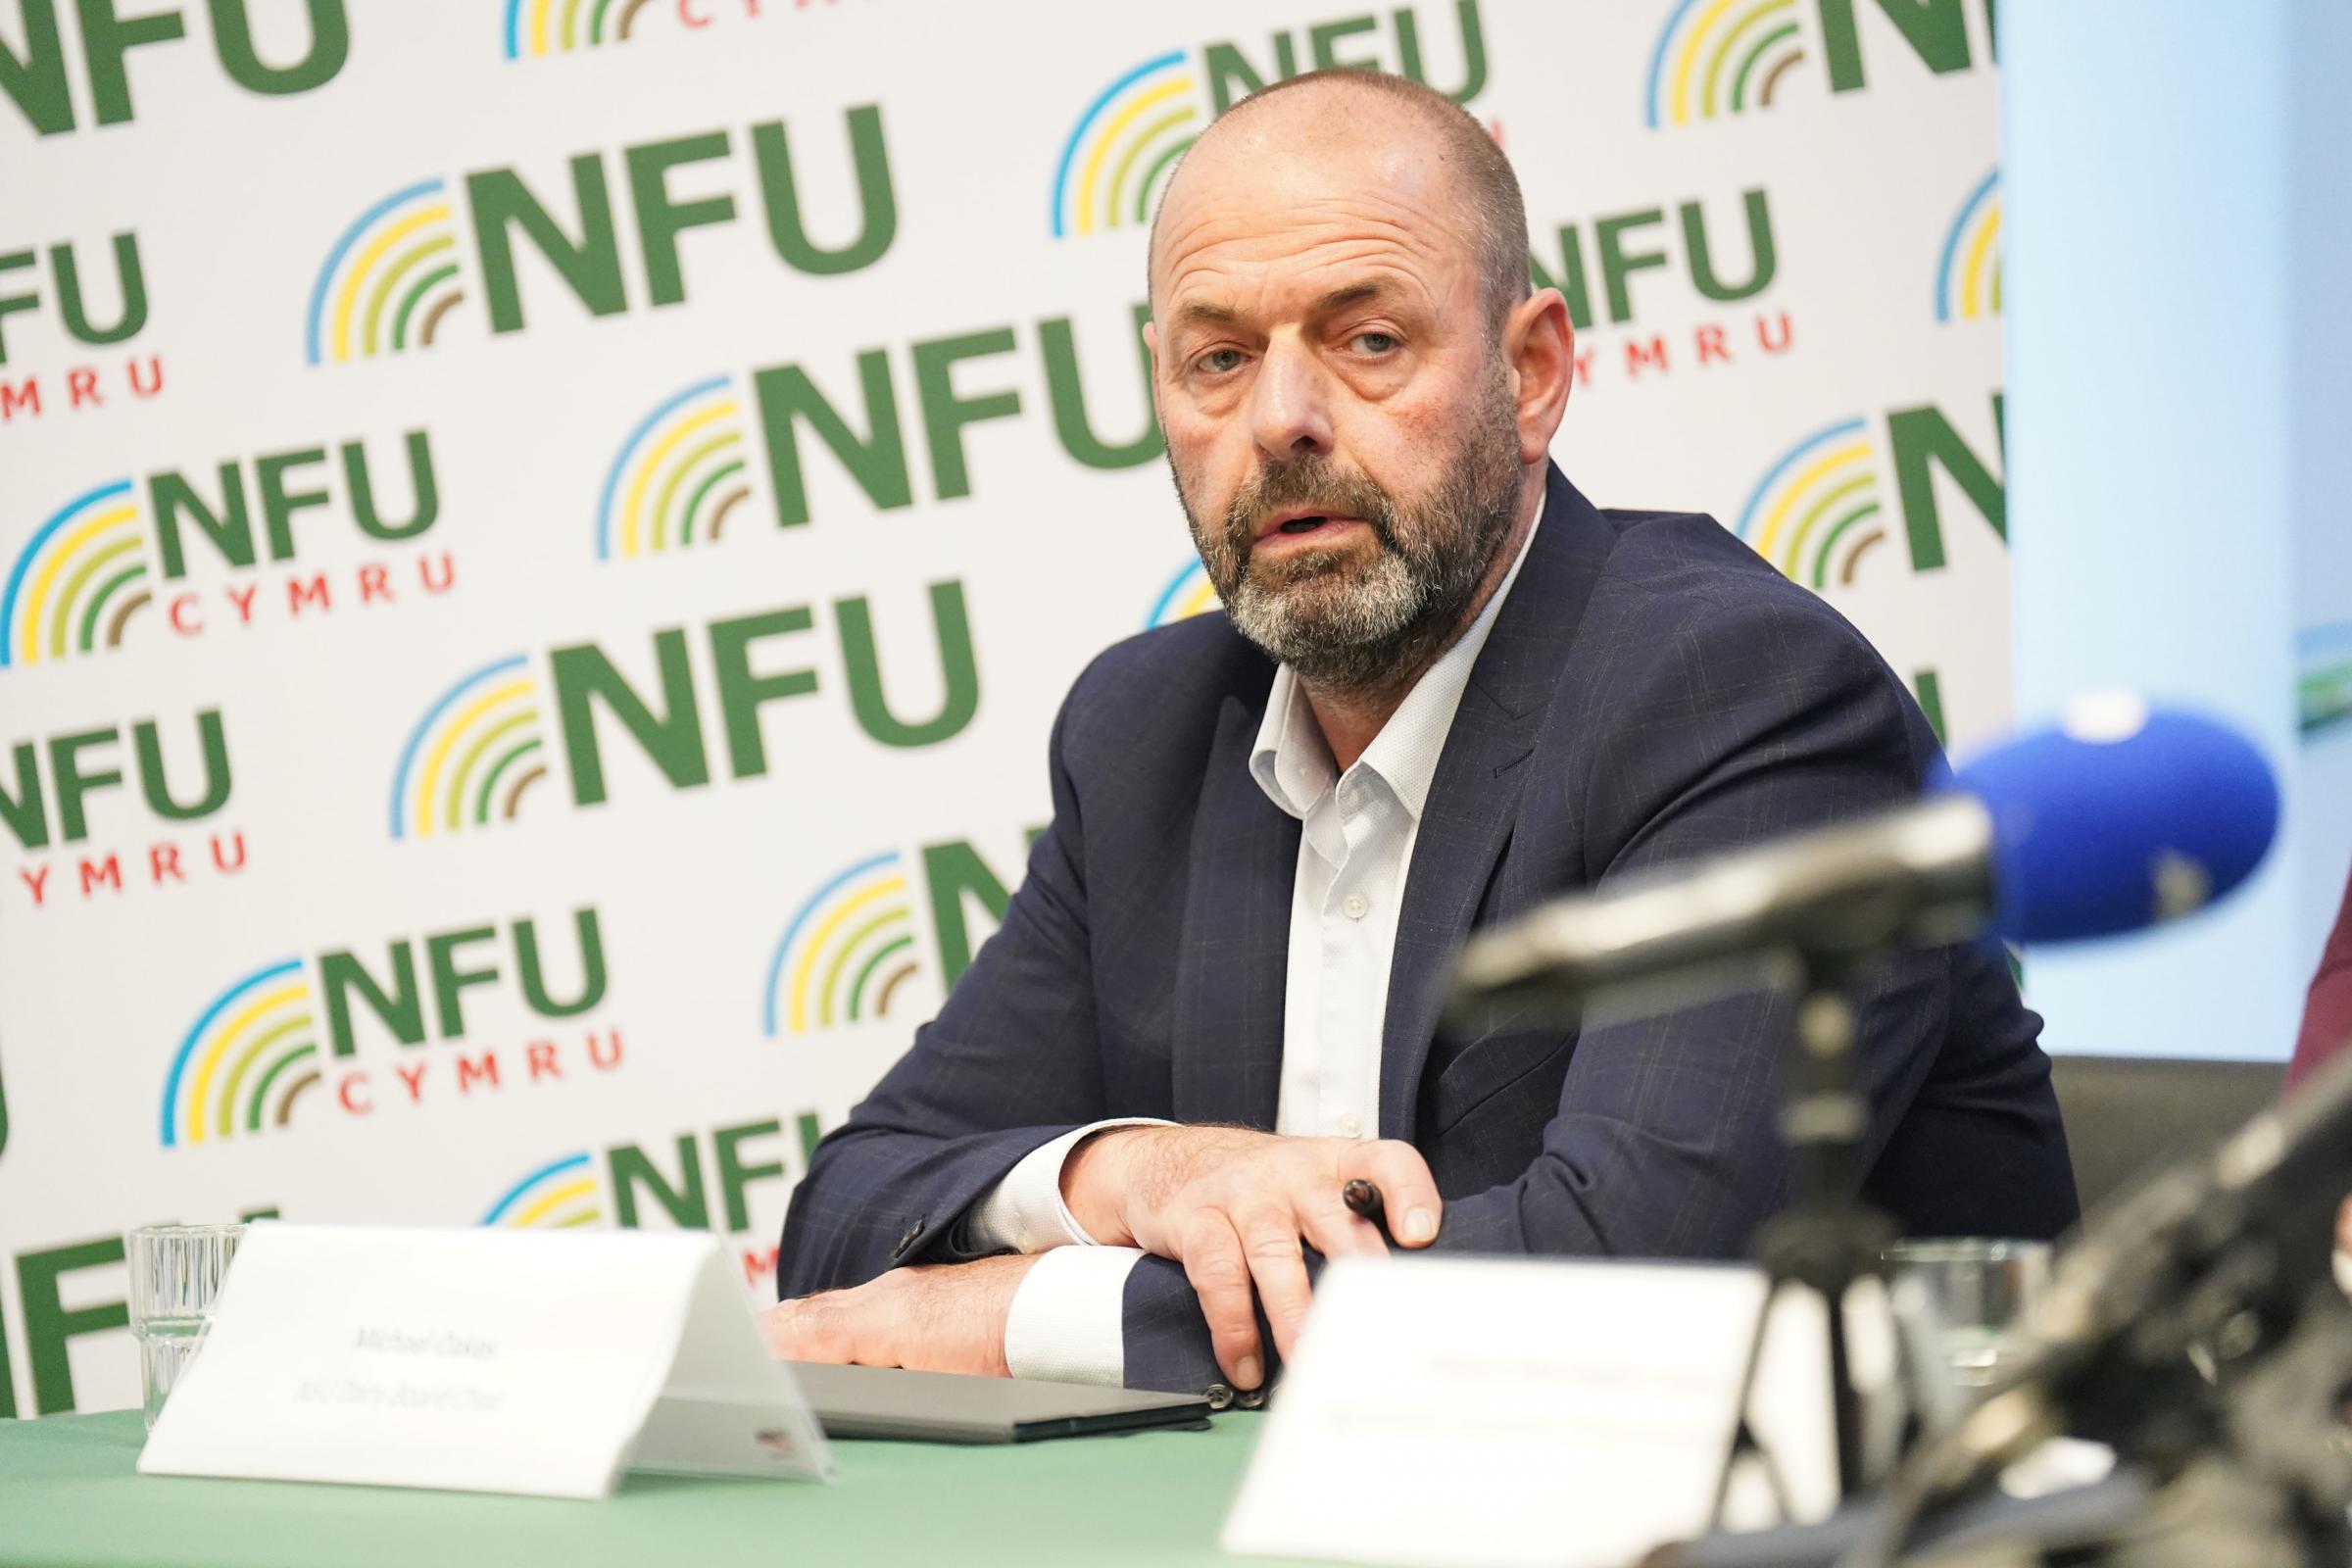 Michael Oakes, chair of the National Farmers Union (NFU) Dairy Board, speaking about the food supply chain issues impacting multiple farming sectors during a press conference at the NFU in London